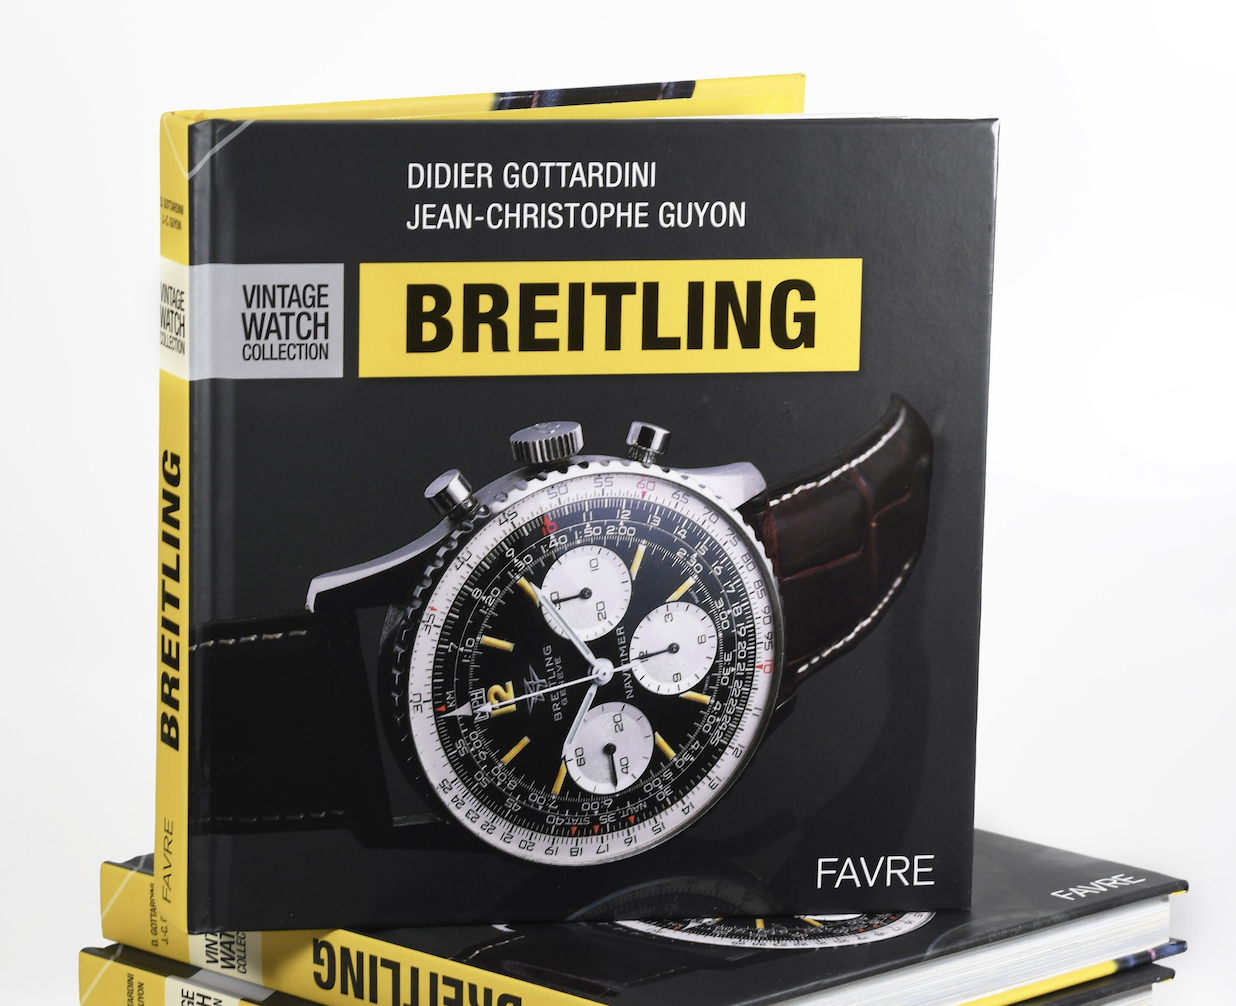 Vintage Watch Collection Breitling